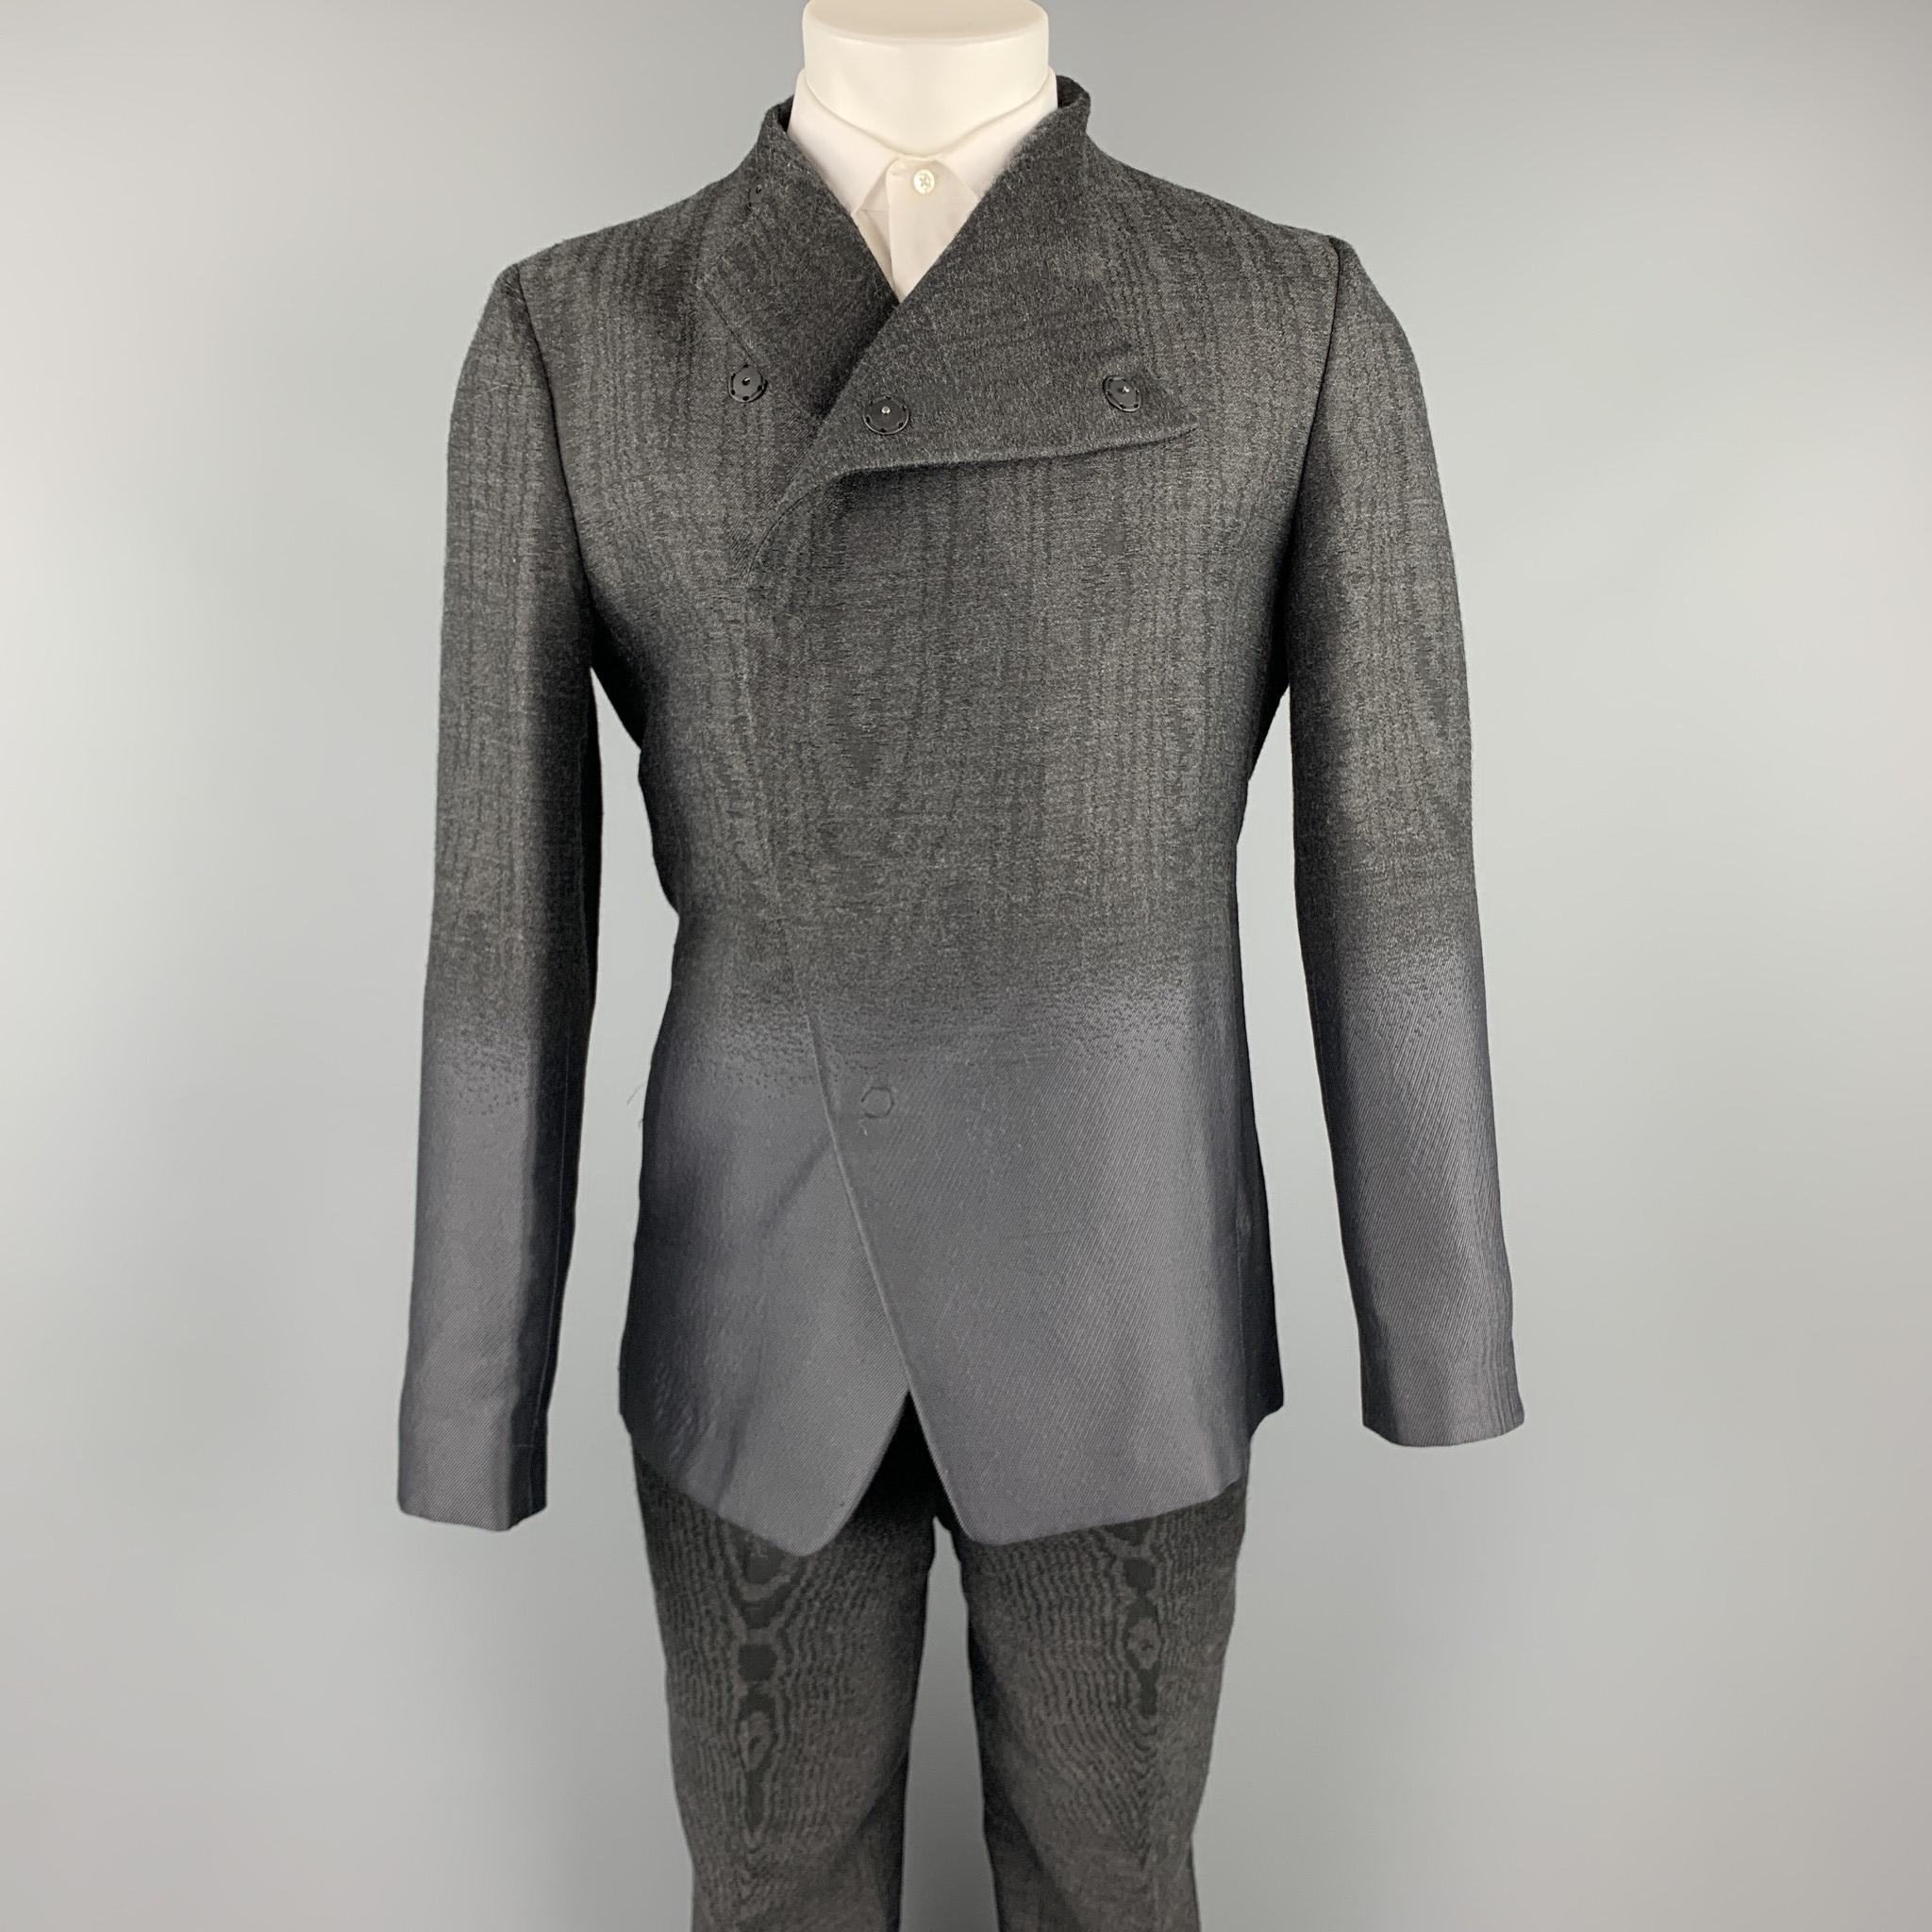 EMPORIO ARMANI suit comes in charcoal ombre with a half liner and includes an asymmetrical snap button sport coat with a collarless lapel and matching flat front trousers. Made in Italy.

Excellent Pre-Owned Condition.
Marked: IT